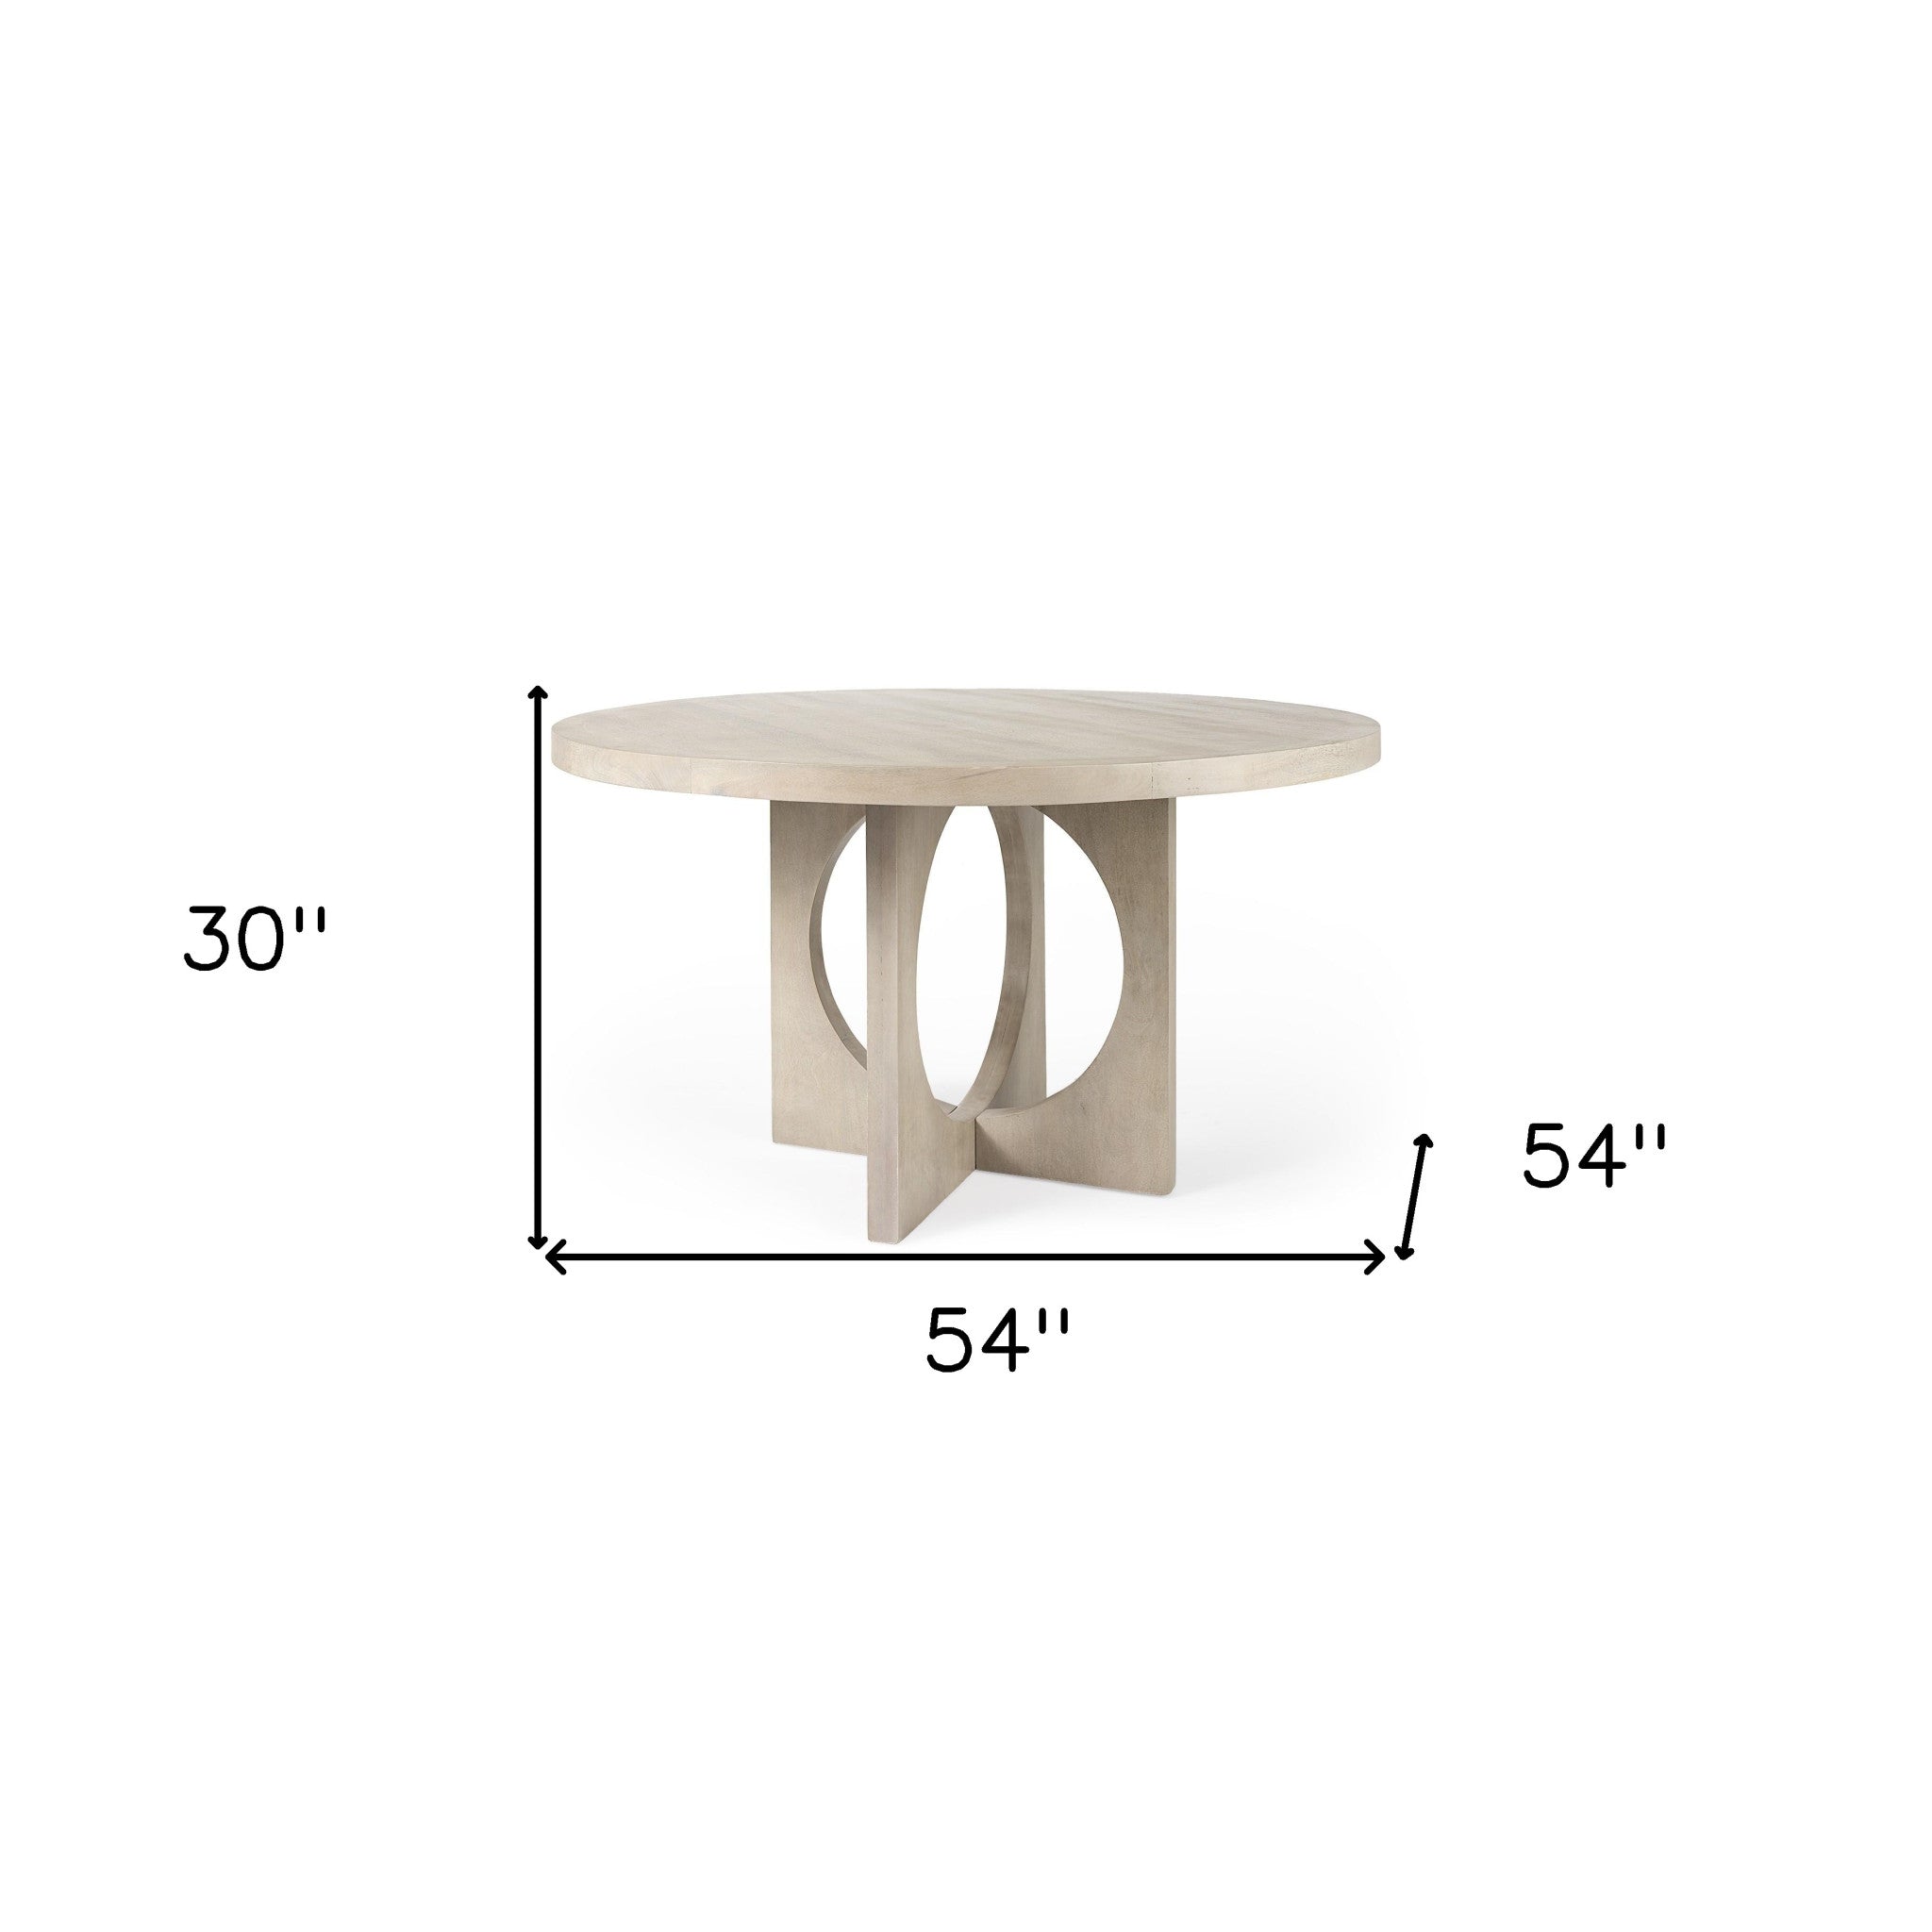 Light Natural Wood Round Geometric Dining Table